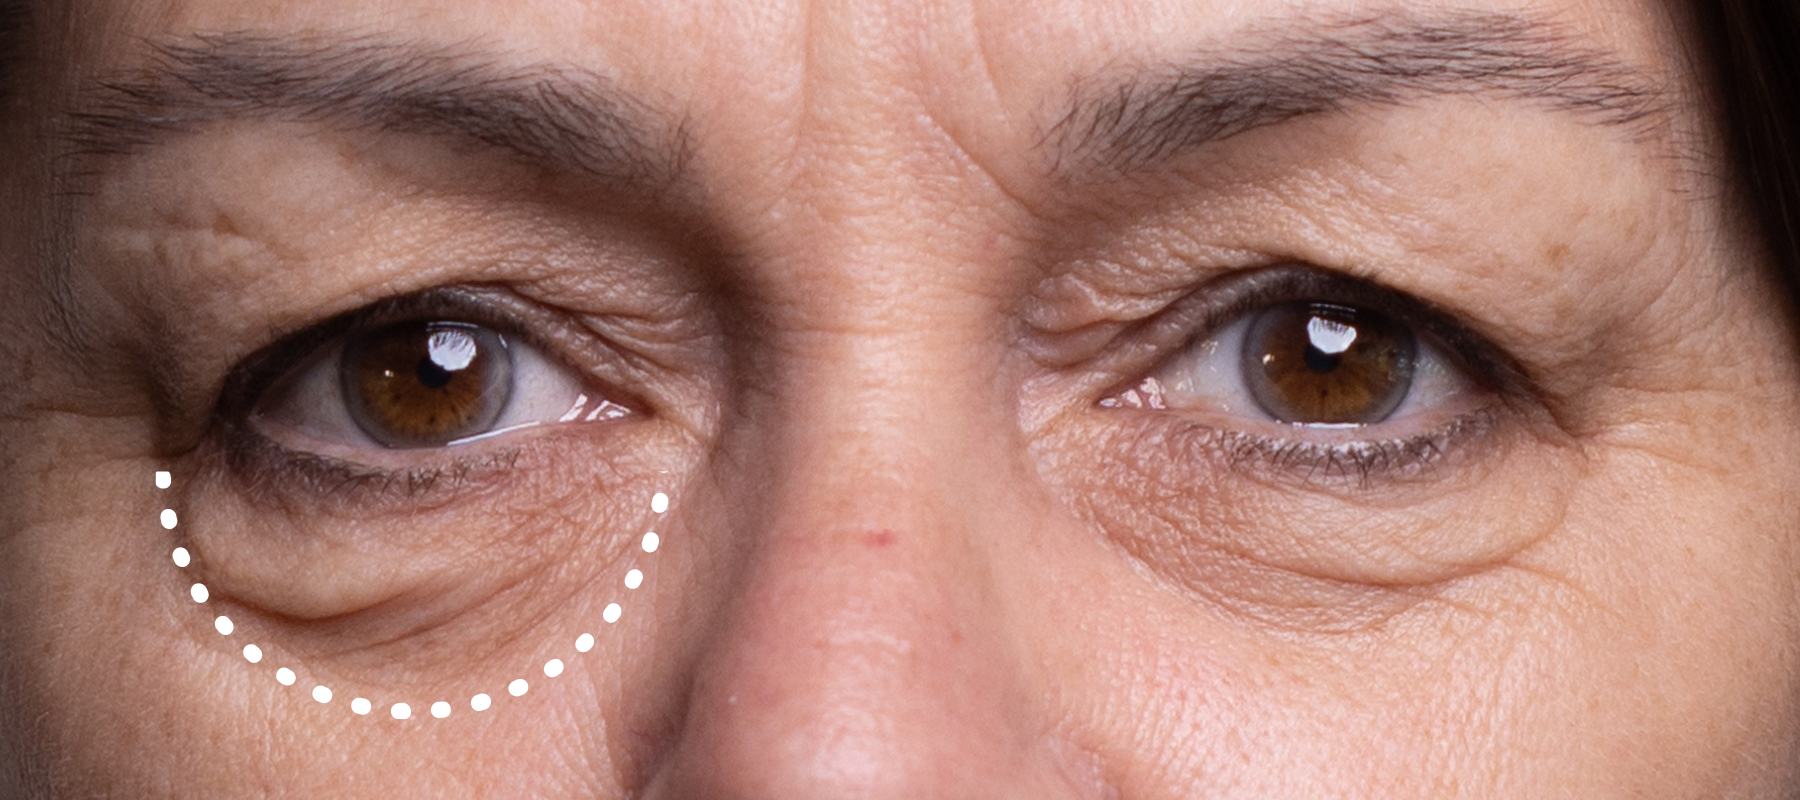 Are You Considering Eye Bag Removal Surgery? <p> Find out about options the surgeons don't want you to know about!